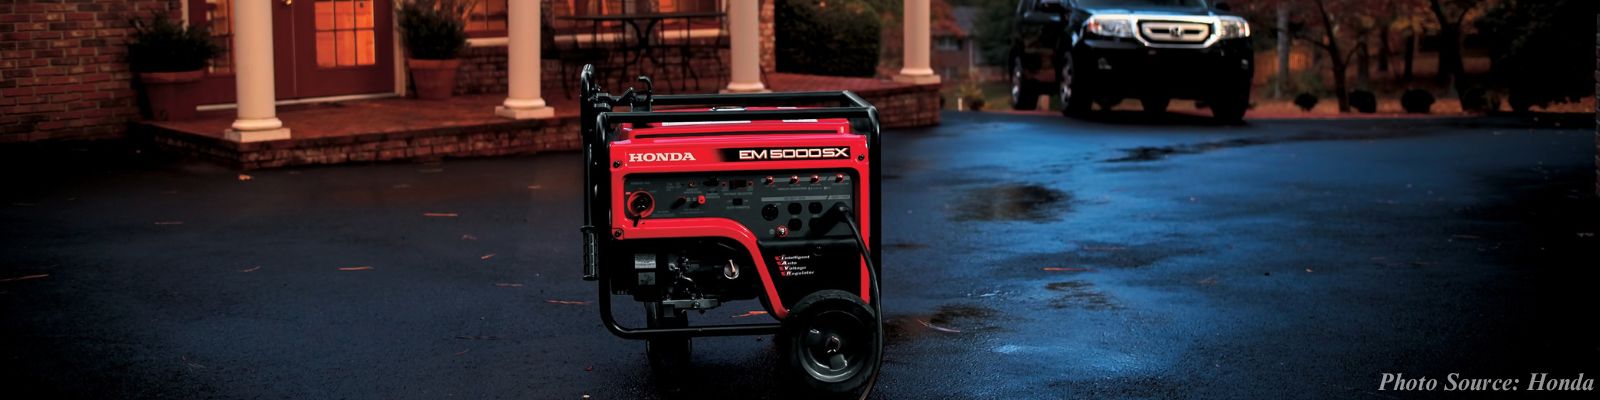 Portable generator with home and car in the background. 